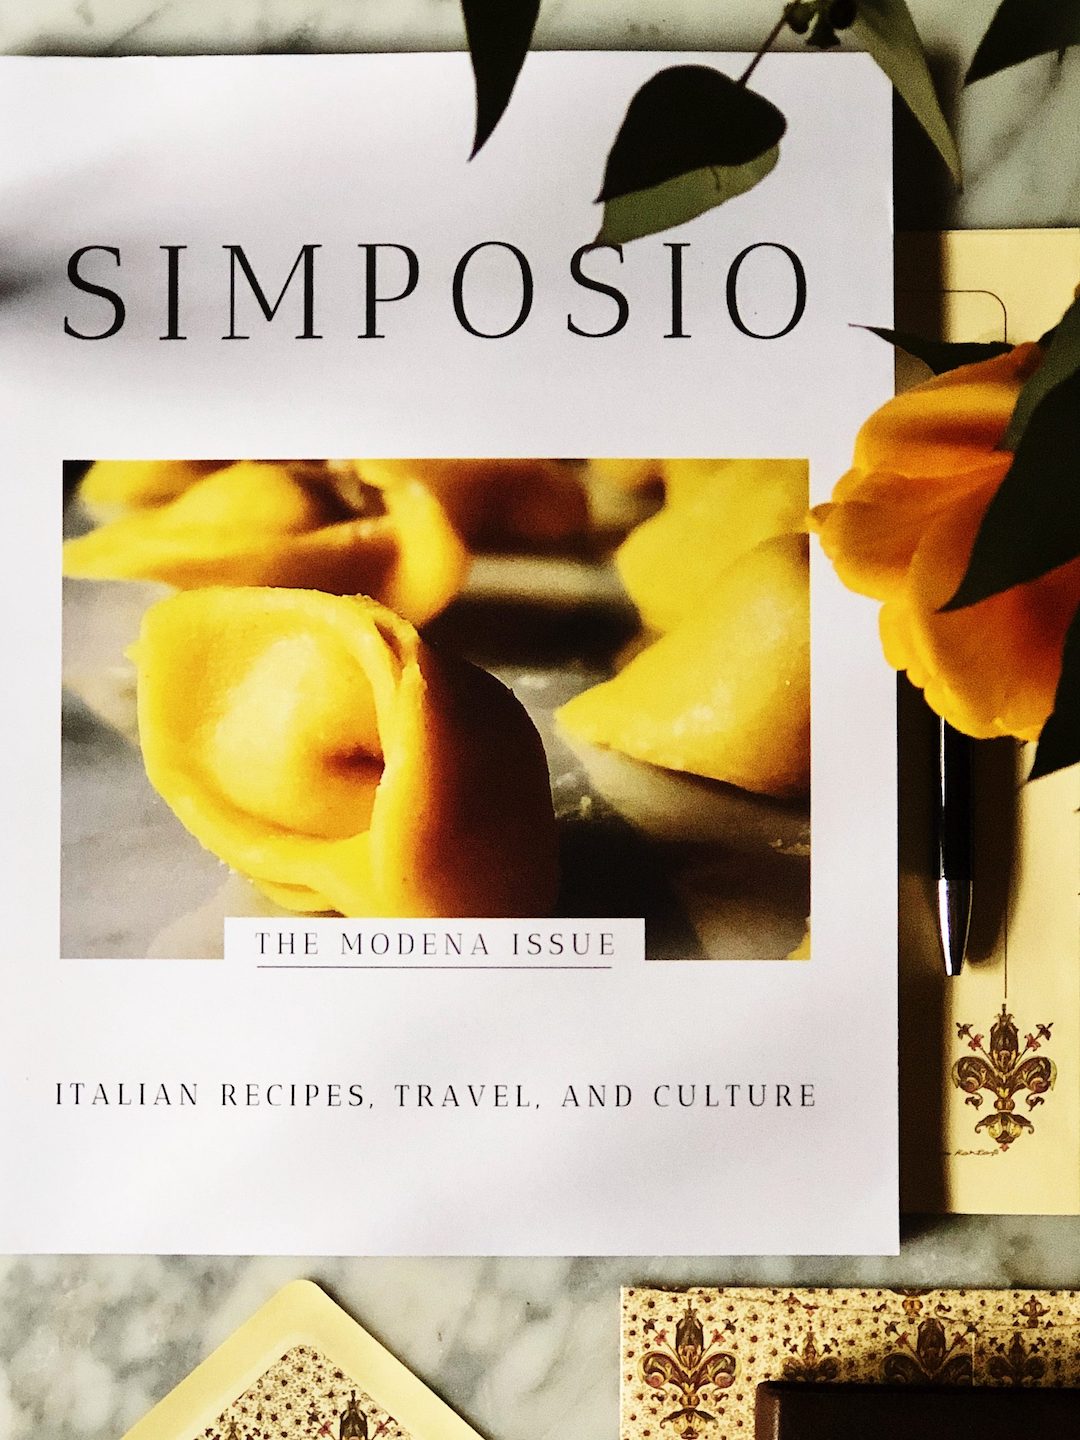 travel cookbooks from Italy